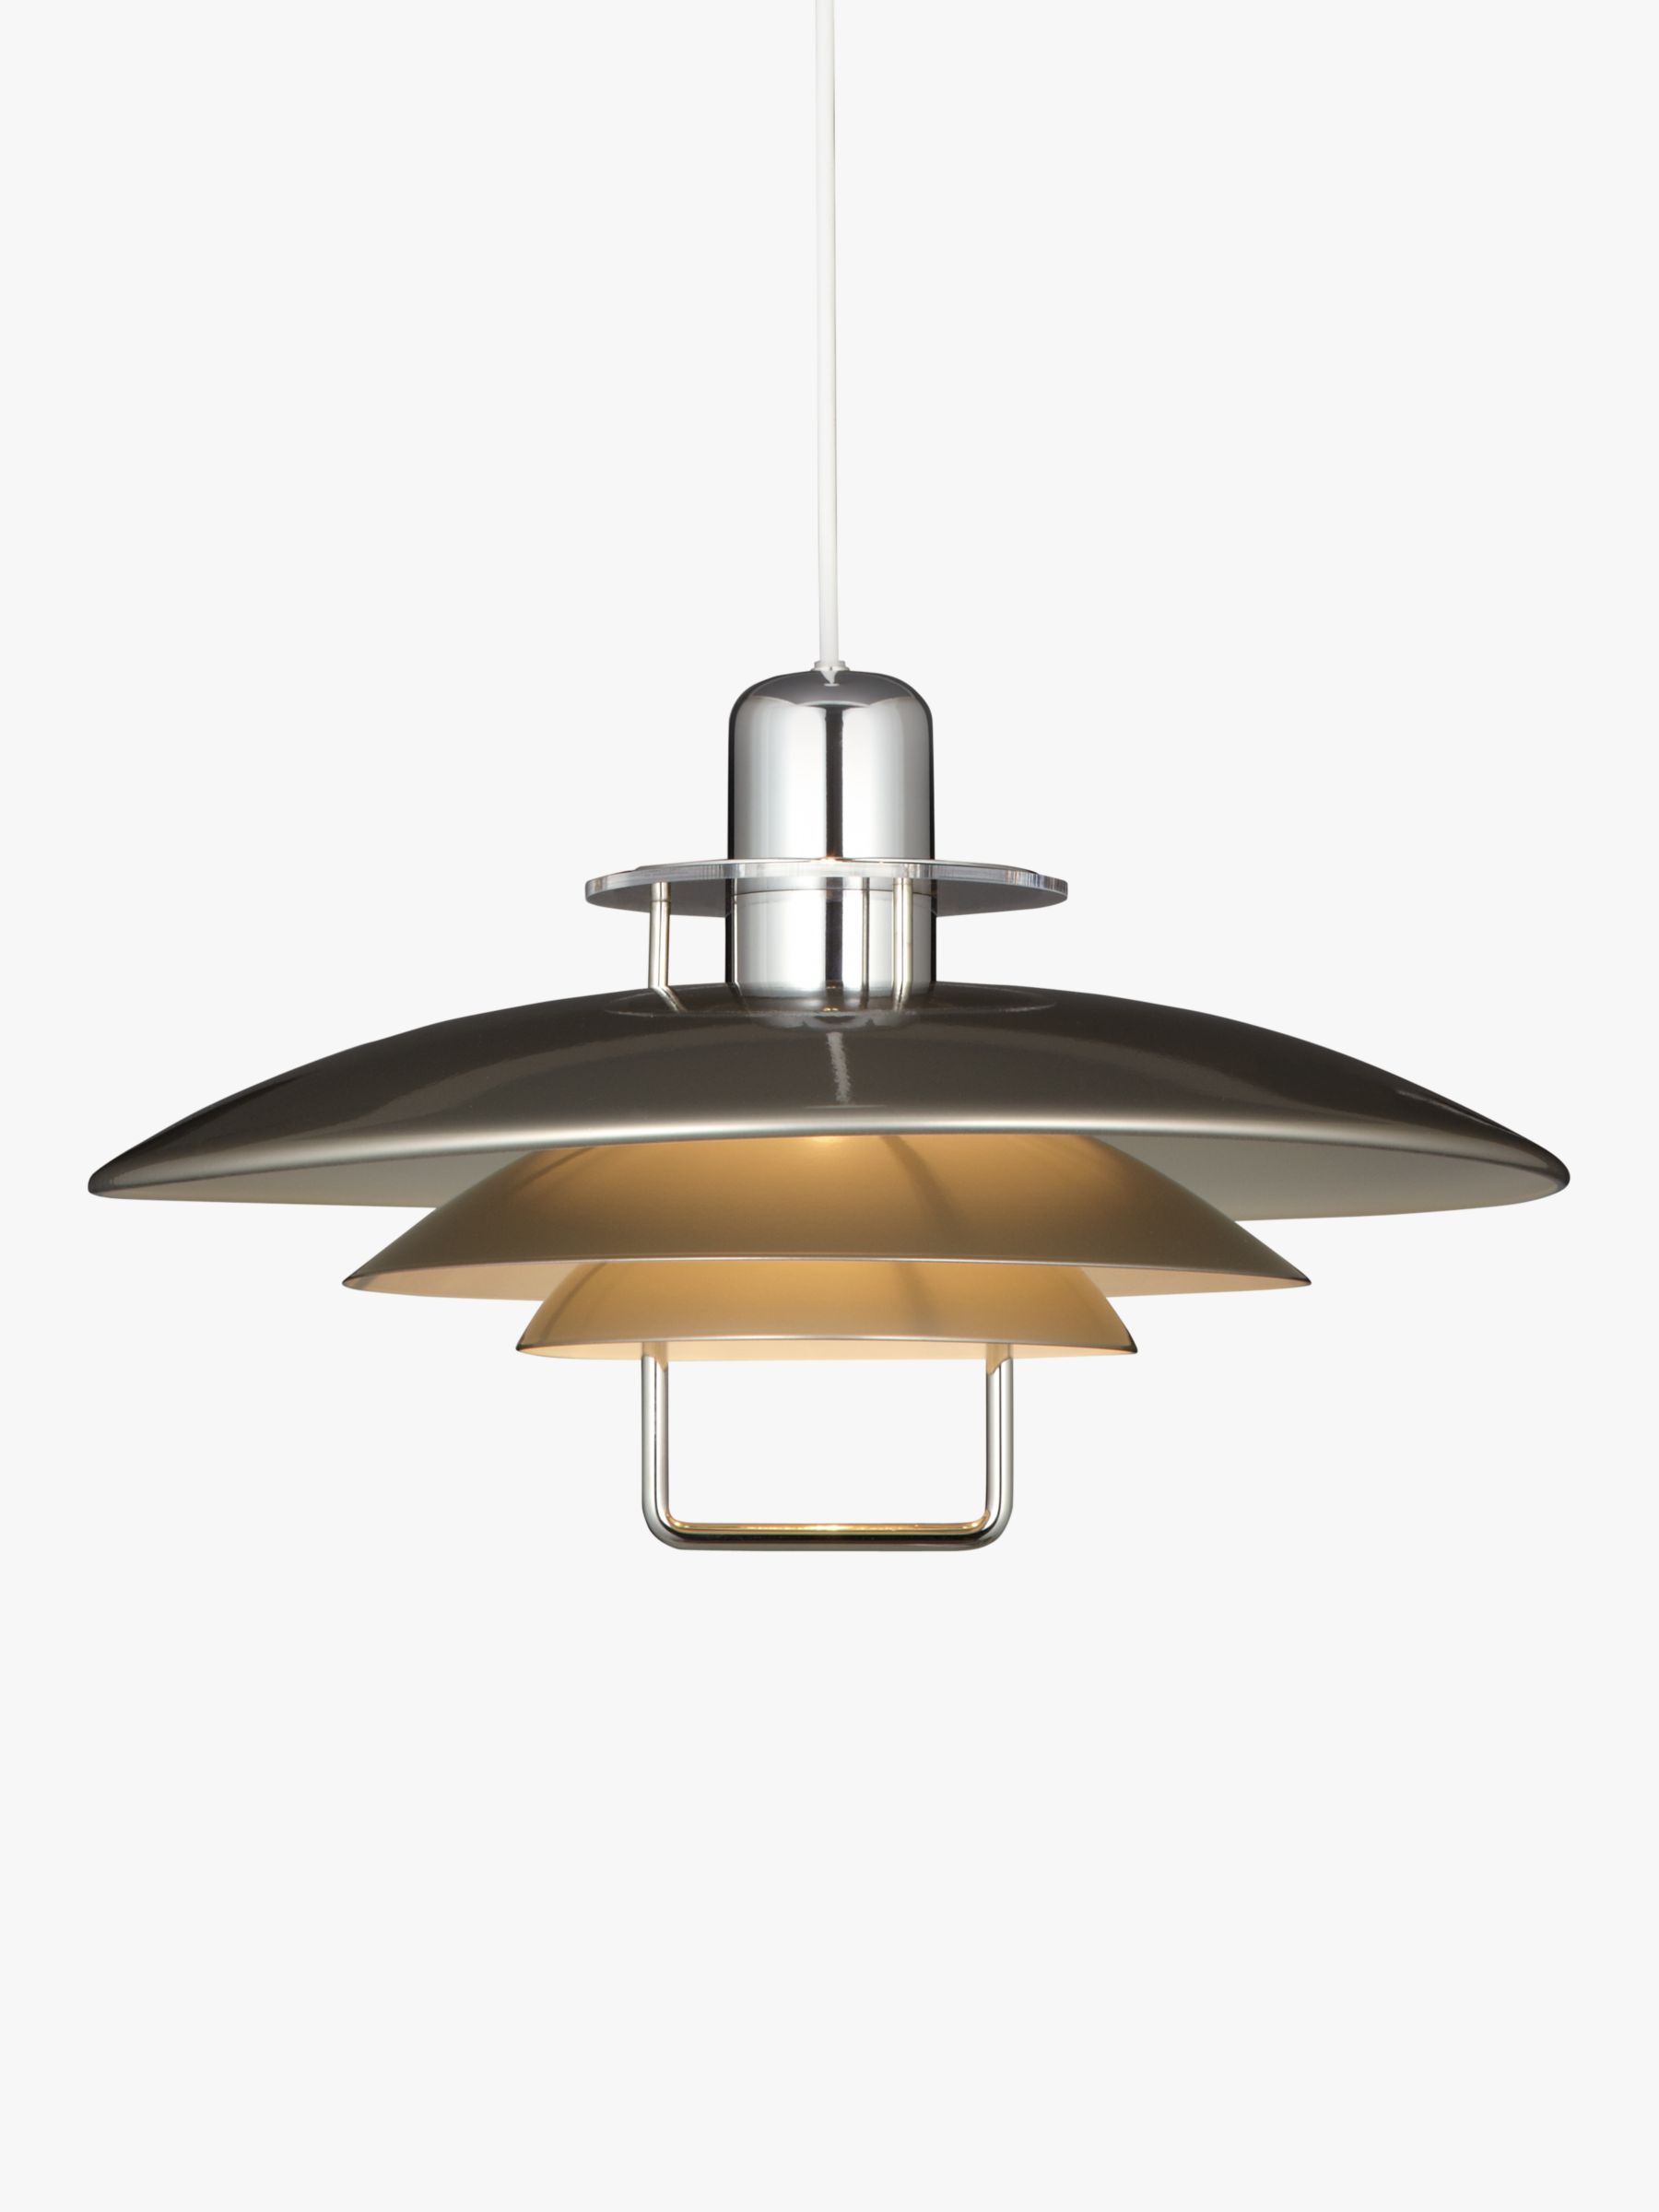 Belid Felix Rise And Fall Ceiling Light Satin Nickel